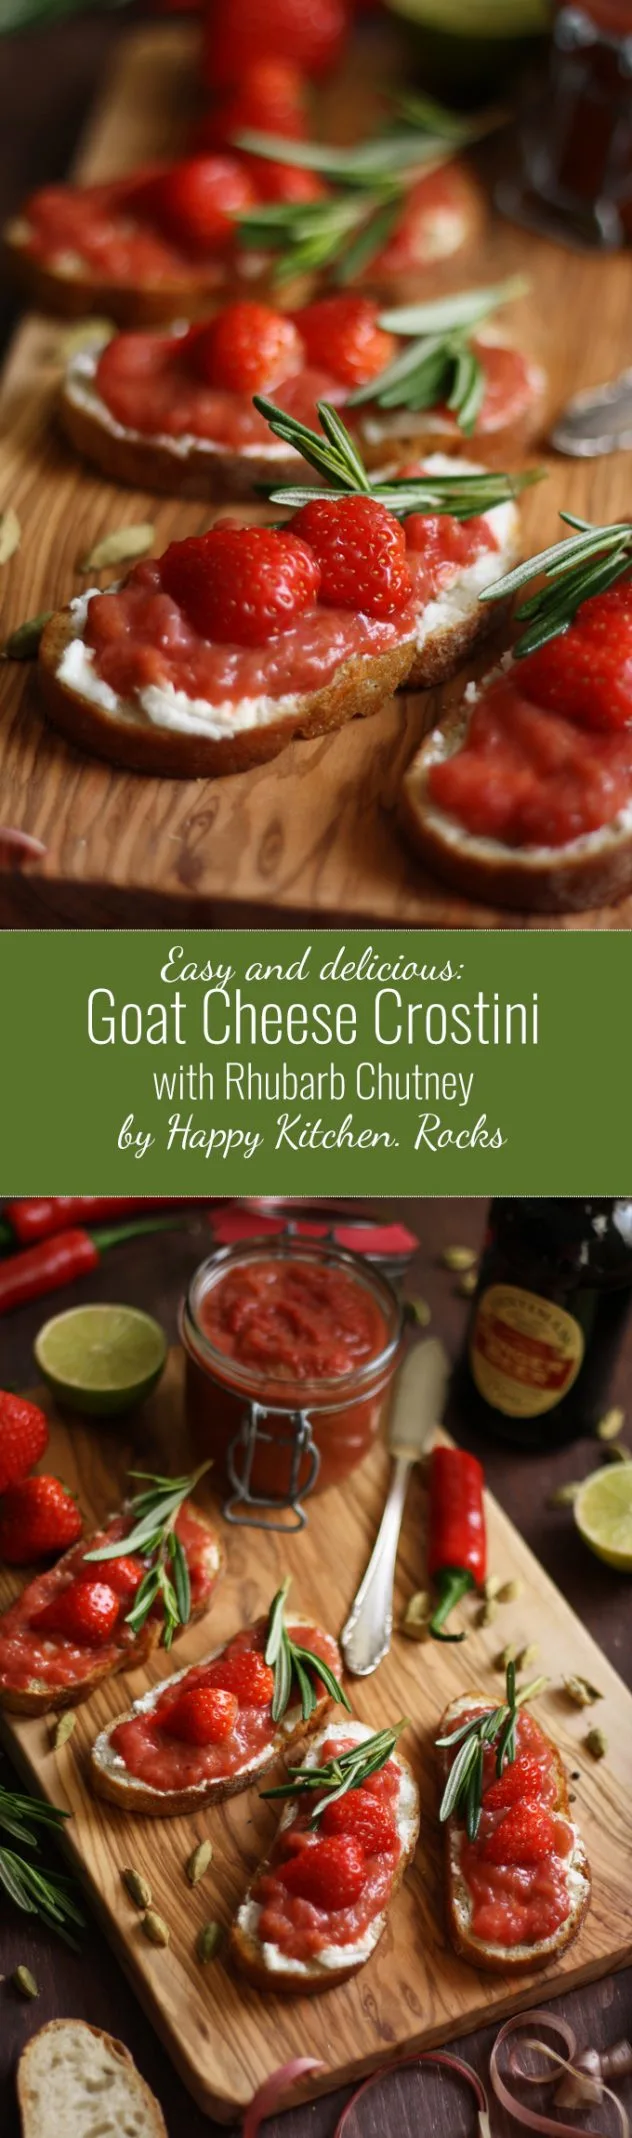 Tender goat cheese paired with tangy and sweet rhubarb chutney spread over fresh crusty ciabatta bread: the best goat cheese crostini ready in 10 minutes!